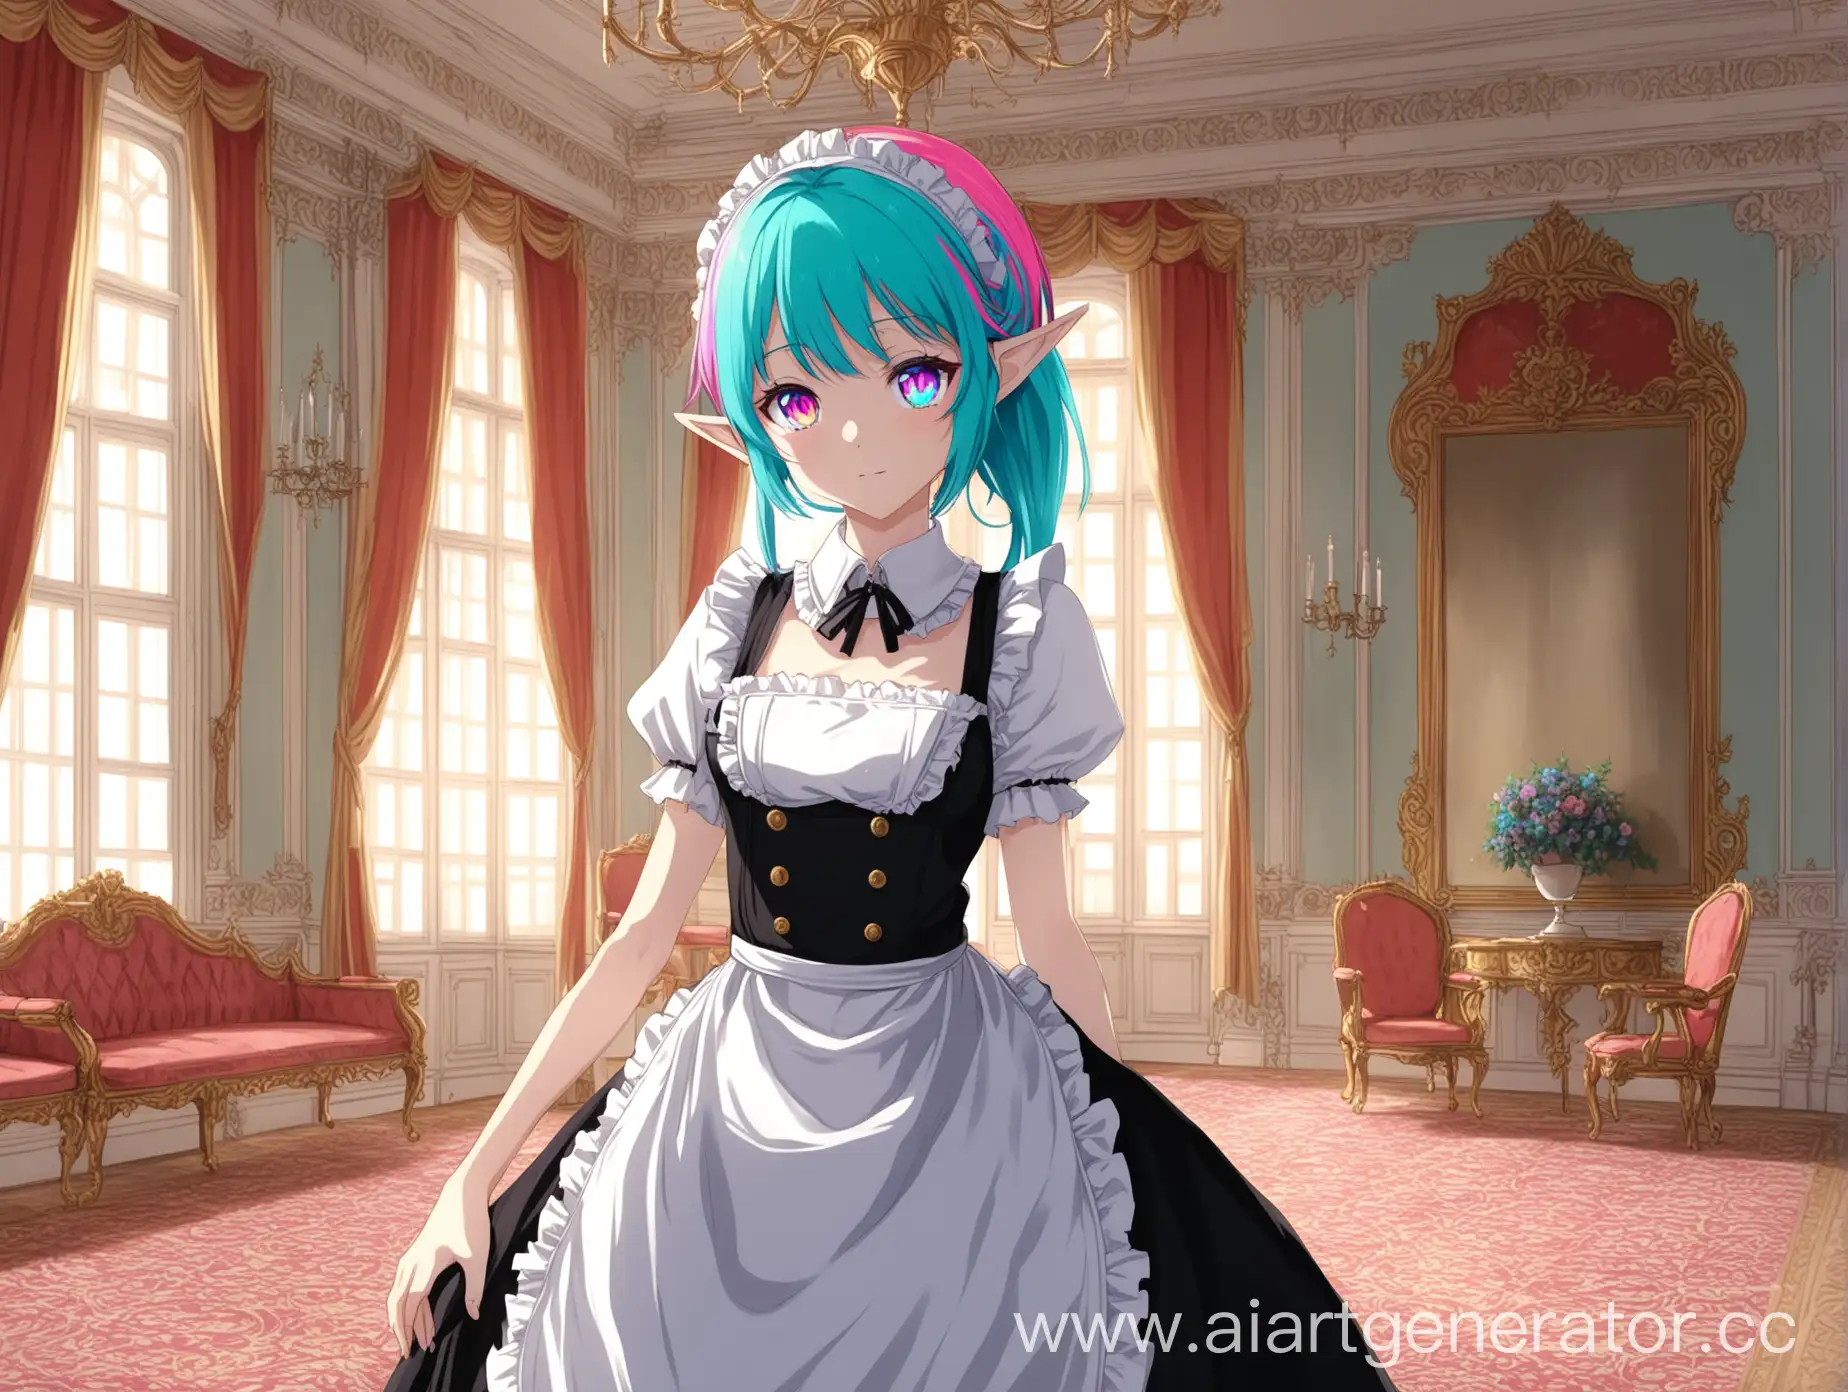 Aristocratic-Mansion-Maid-with-Colorful-Hair-and-Eyes